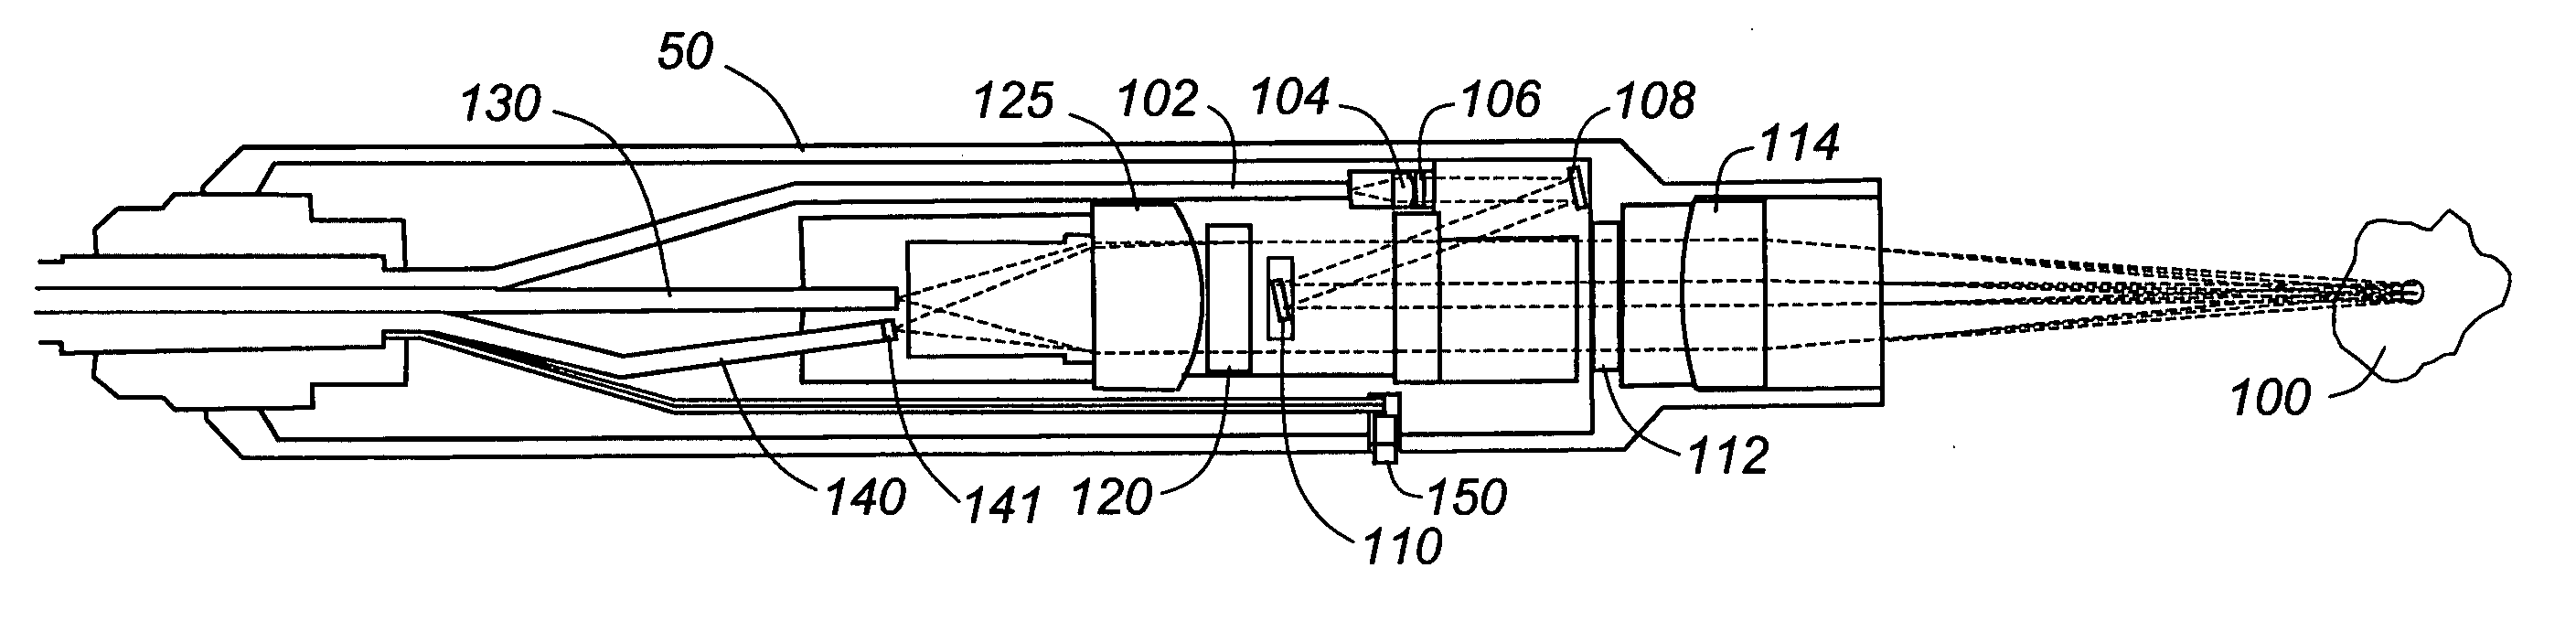 Large-collection-area optical probe